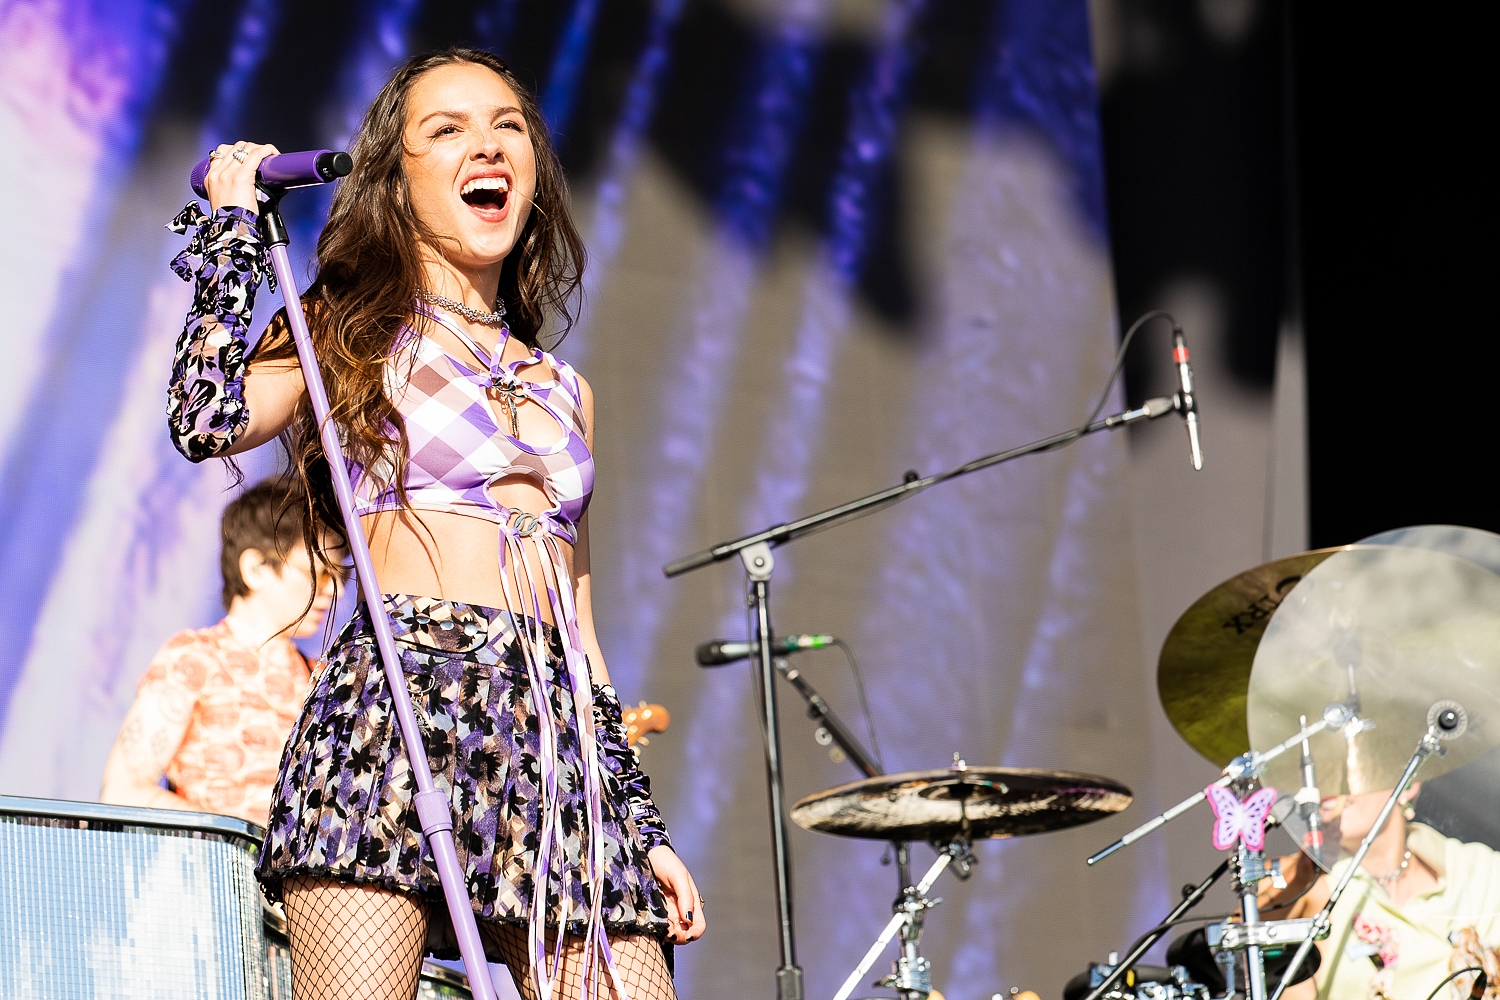 On The Record: “Not only has Olivia Rodrigo got the ‘GUTS’ to headline Glasto, you bet she’d have the glory too.”